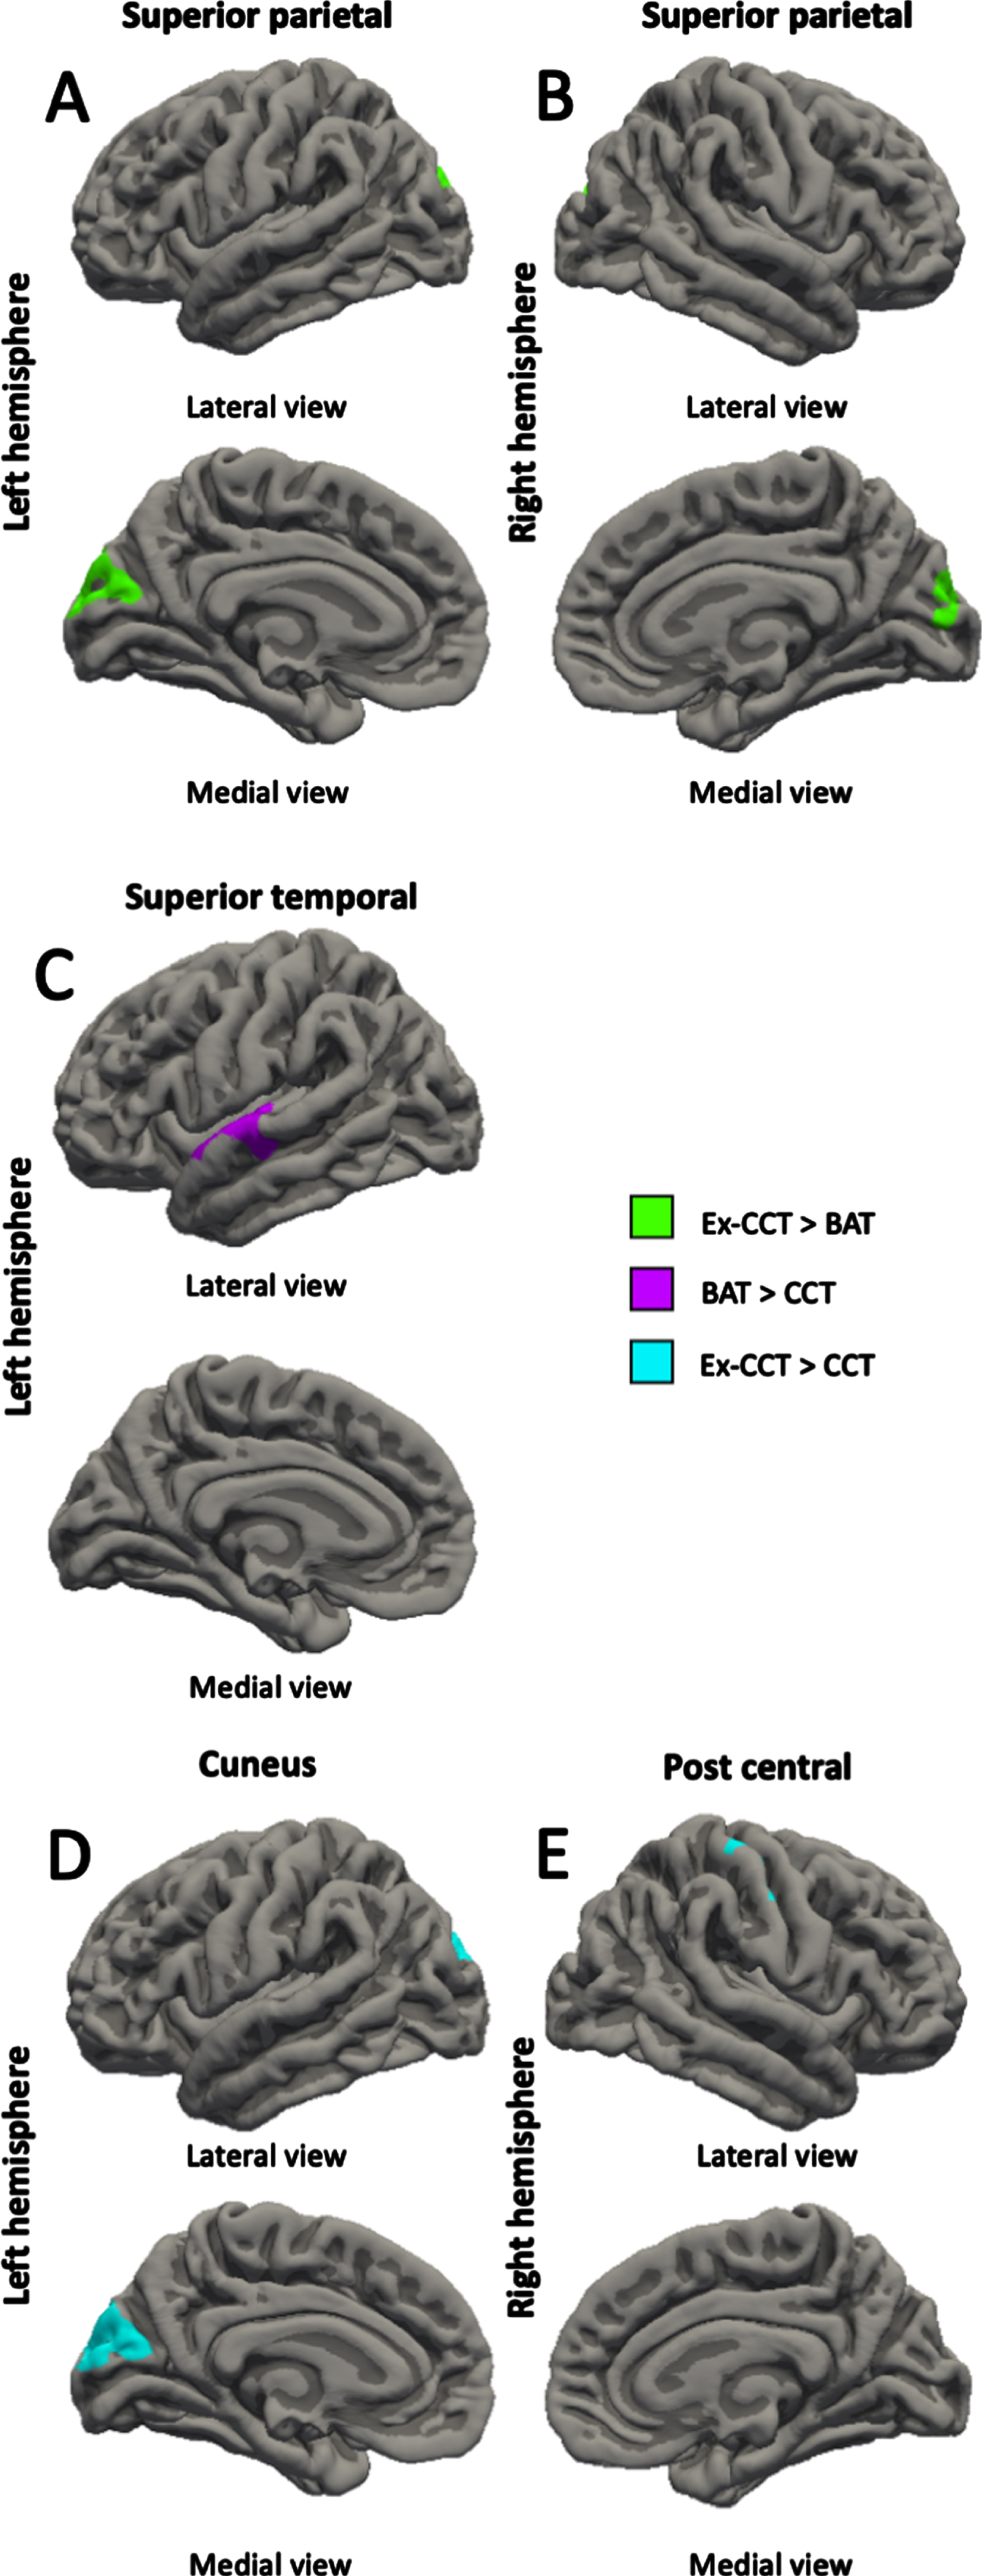 Between-group differences (α< 0.05) in: A) left superior parietal thickness; B) right superior parietal thickness; C) left superior temporal thickness; D) left cuneus thickness; and E) right post central thickness, controlling for age, sex, and MoCA.